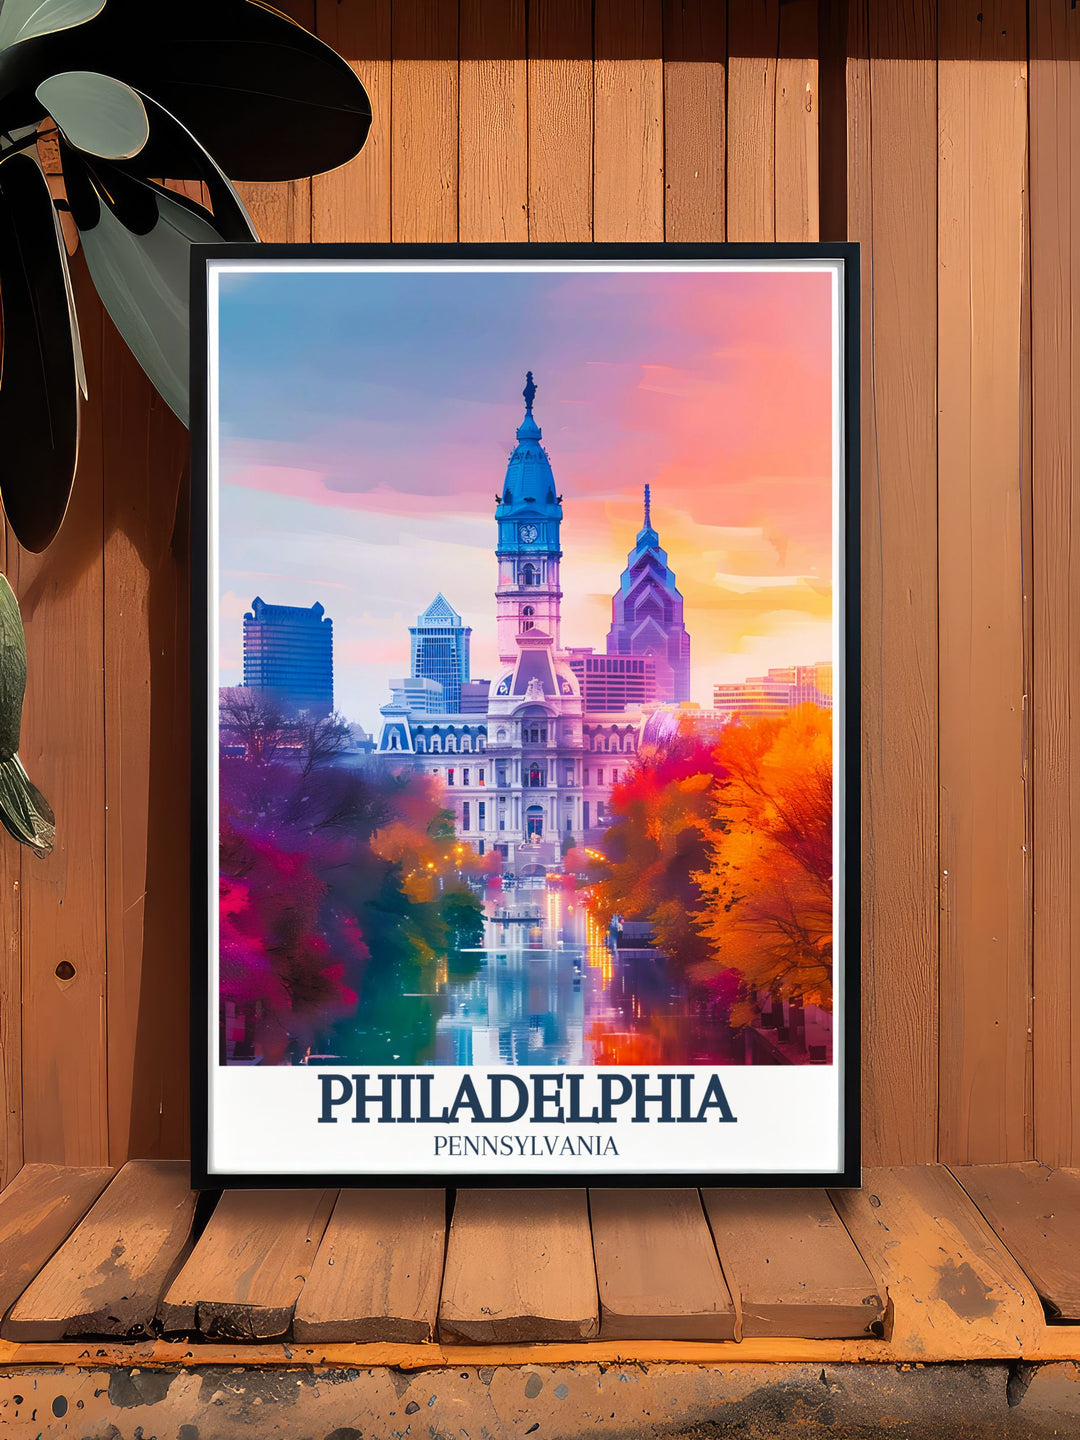 High quality Philadelphia artwork depicting Independence National Historical Park Franklin Institute and City Hall ideal for home decor and travel lovers who want to bring a piece of Pennsylvania history into their homes